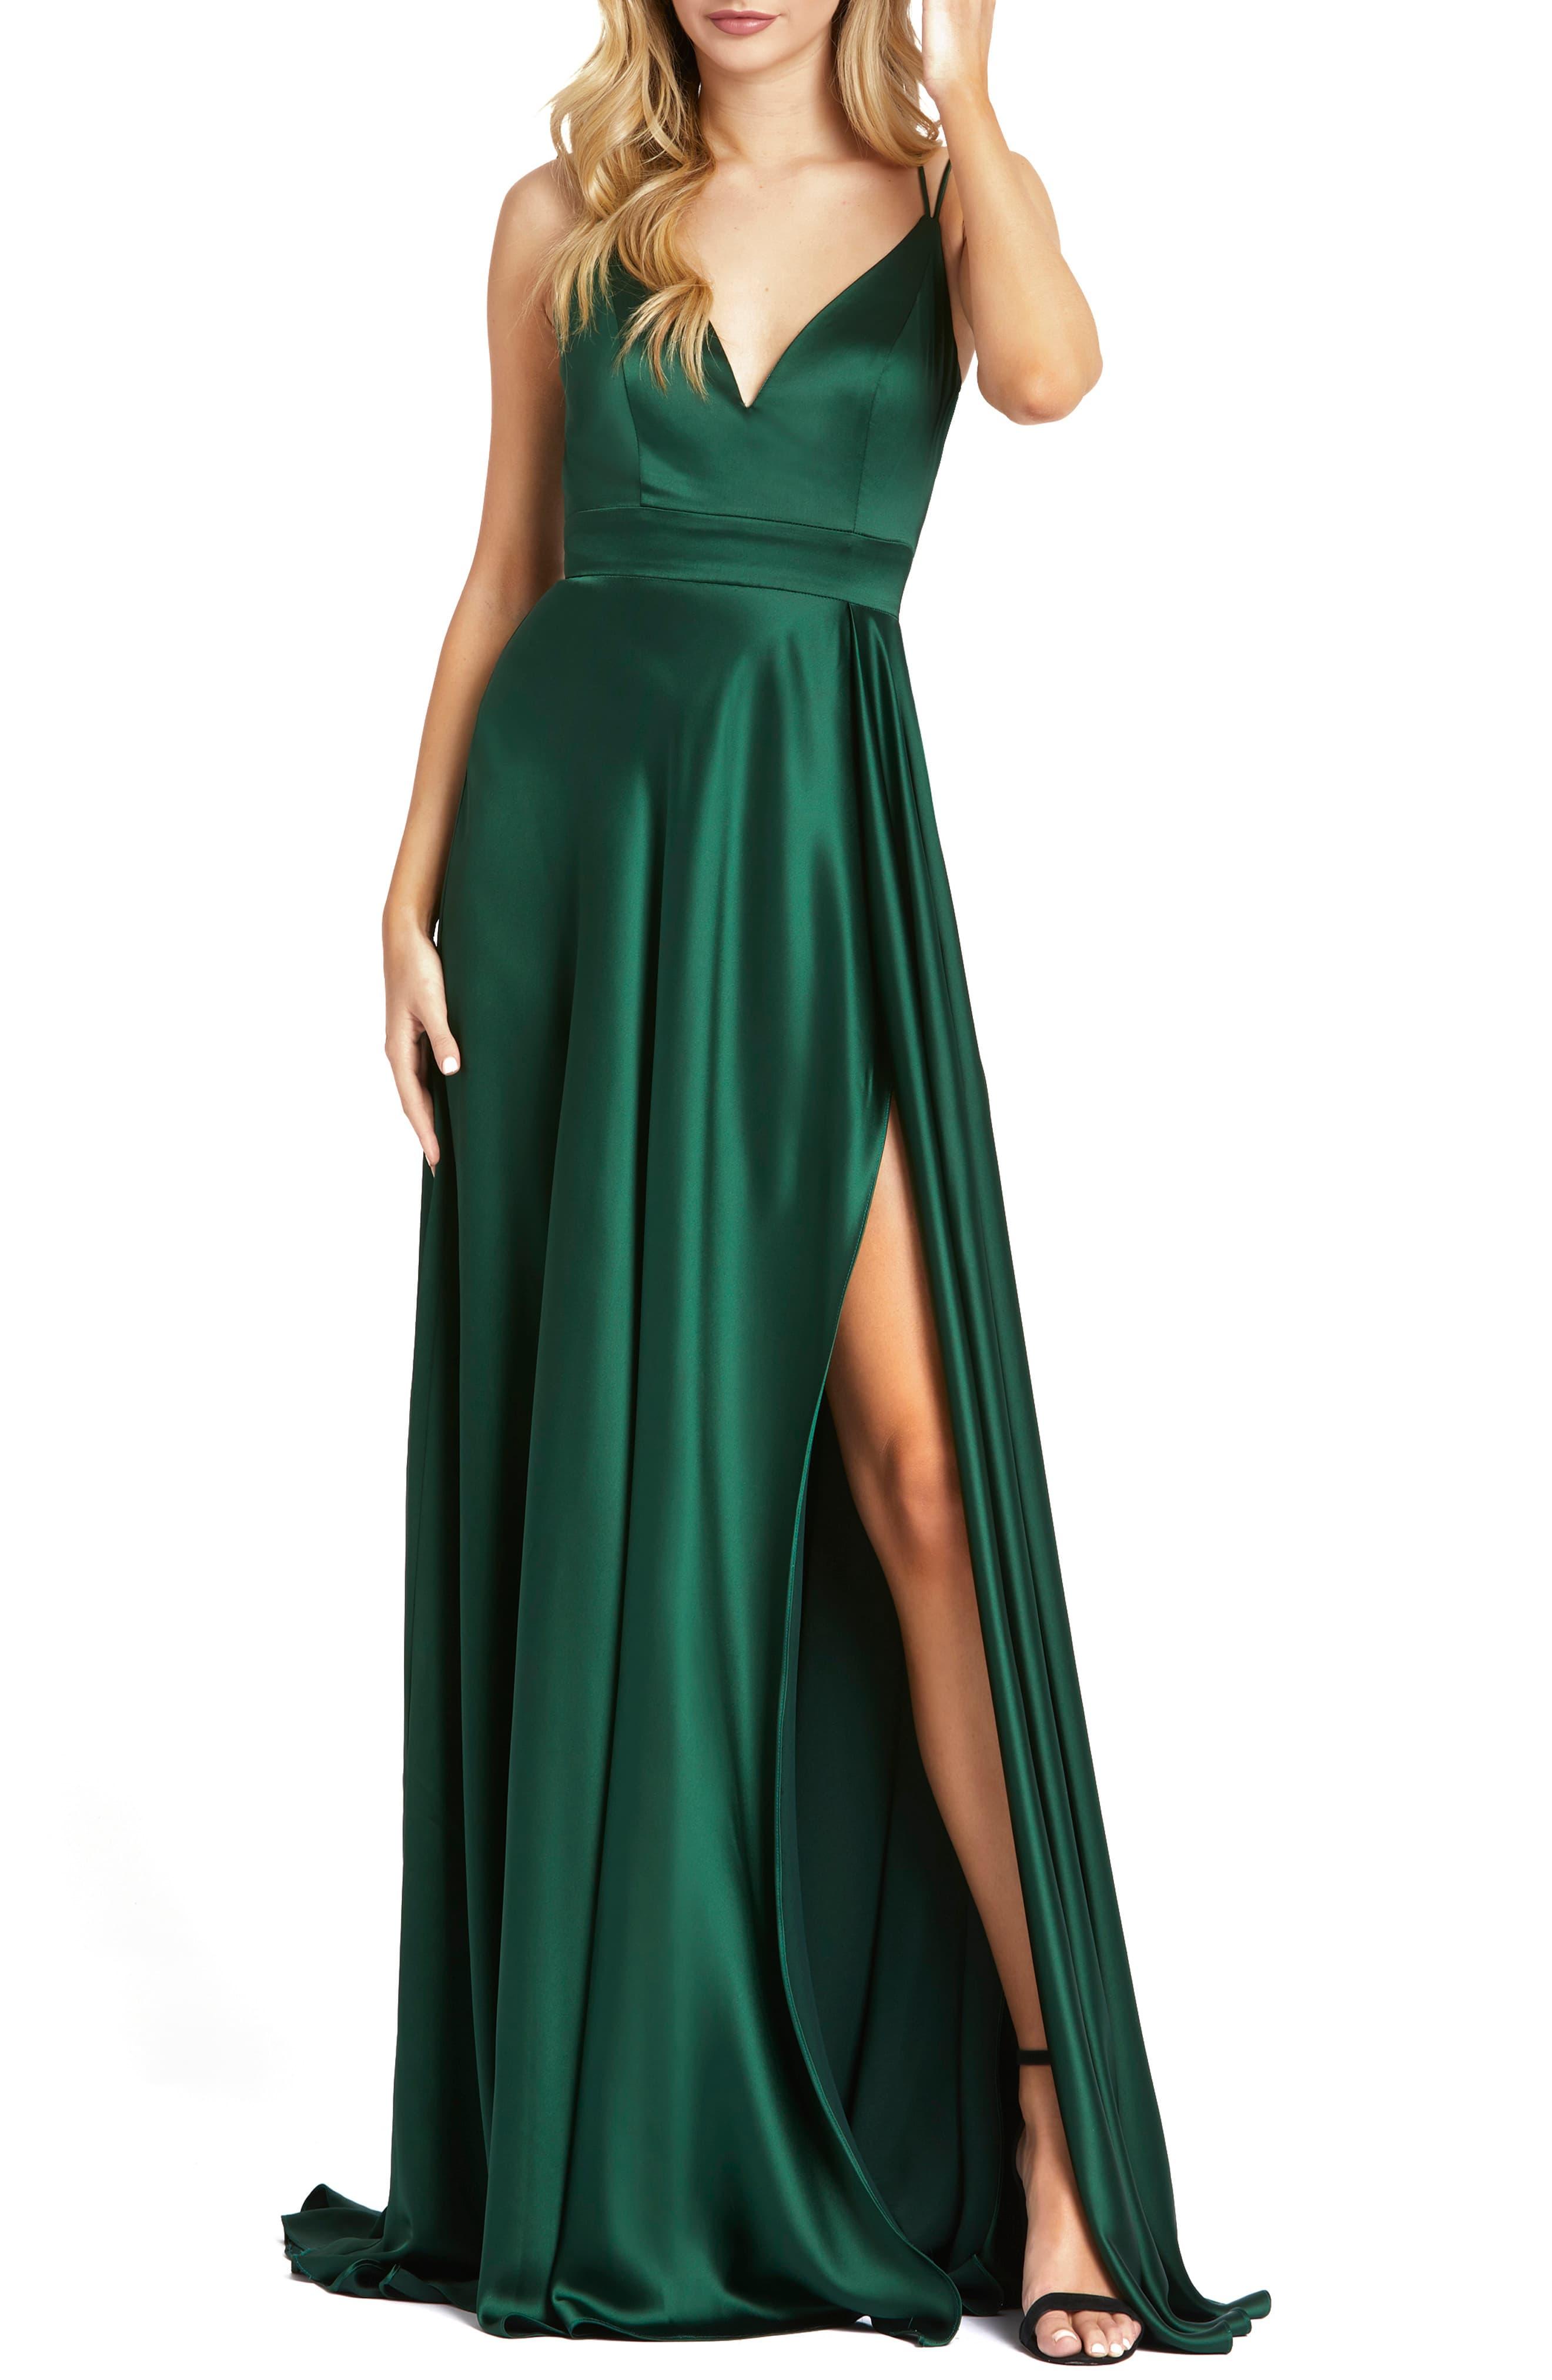 Mac Duggal Strappy Back Satin Gown in Bottle Green (Green) - Lyst